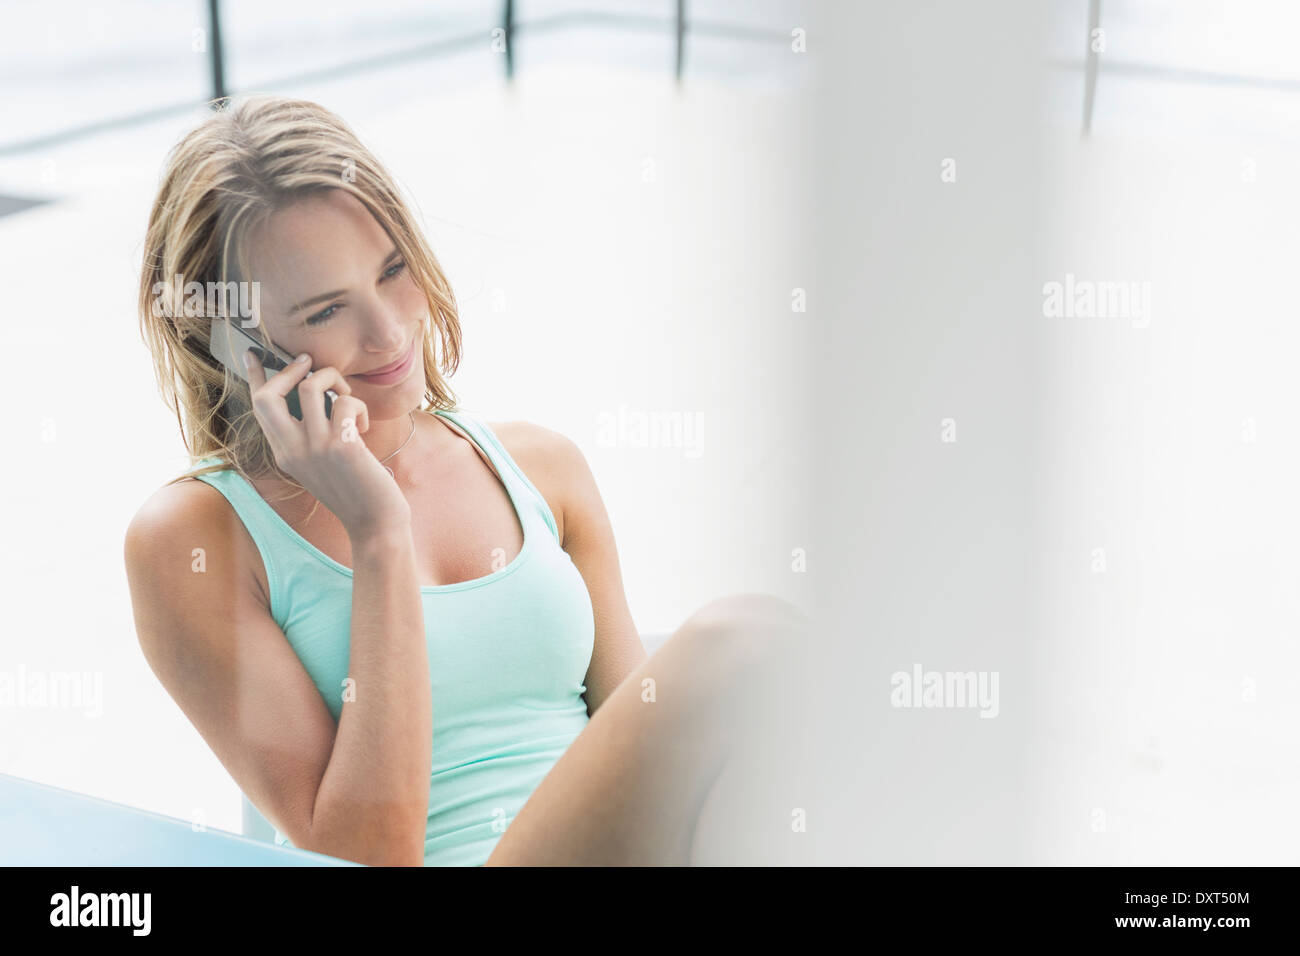 Smiling woman talking on cell phone on patio Stock Photo